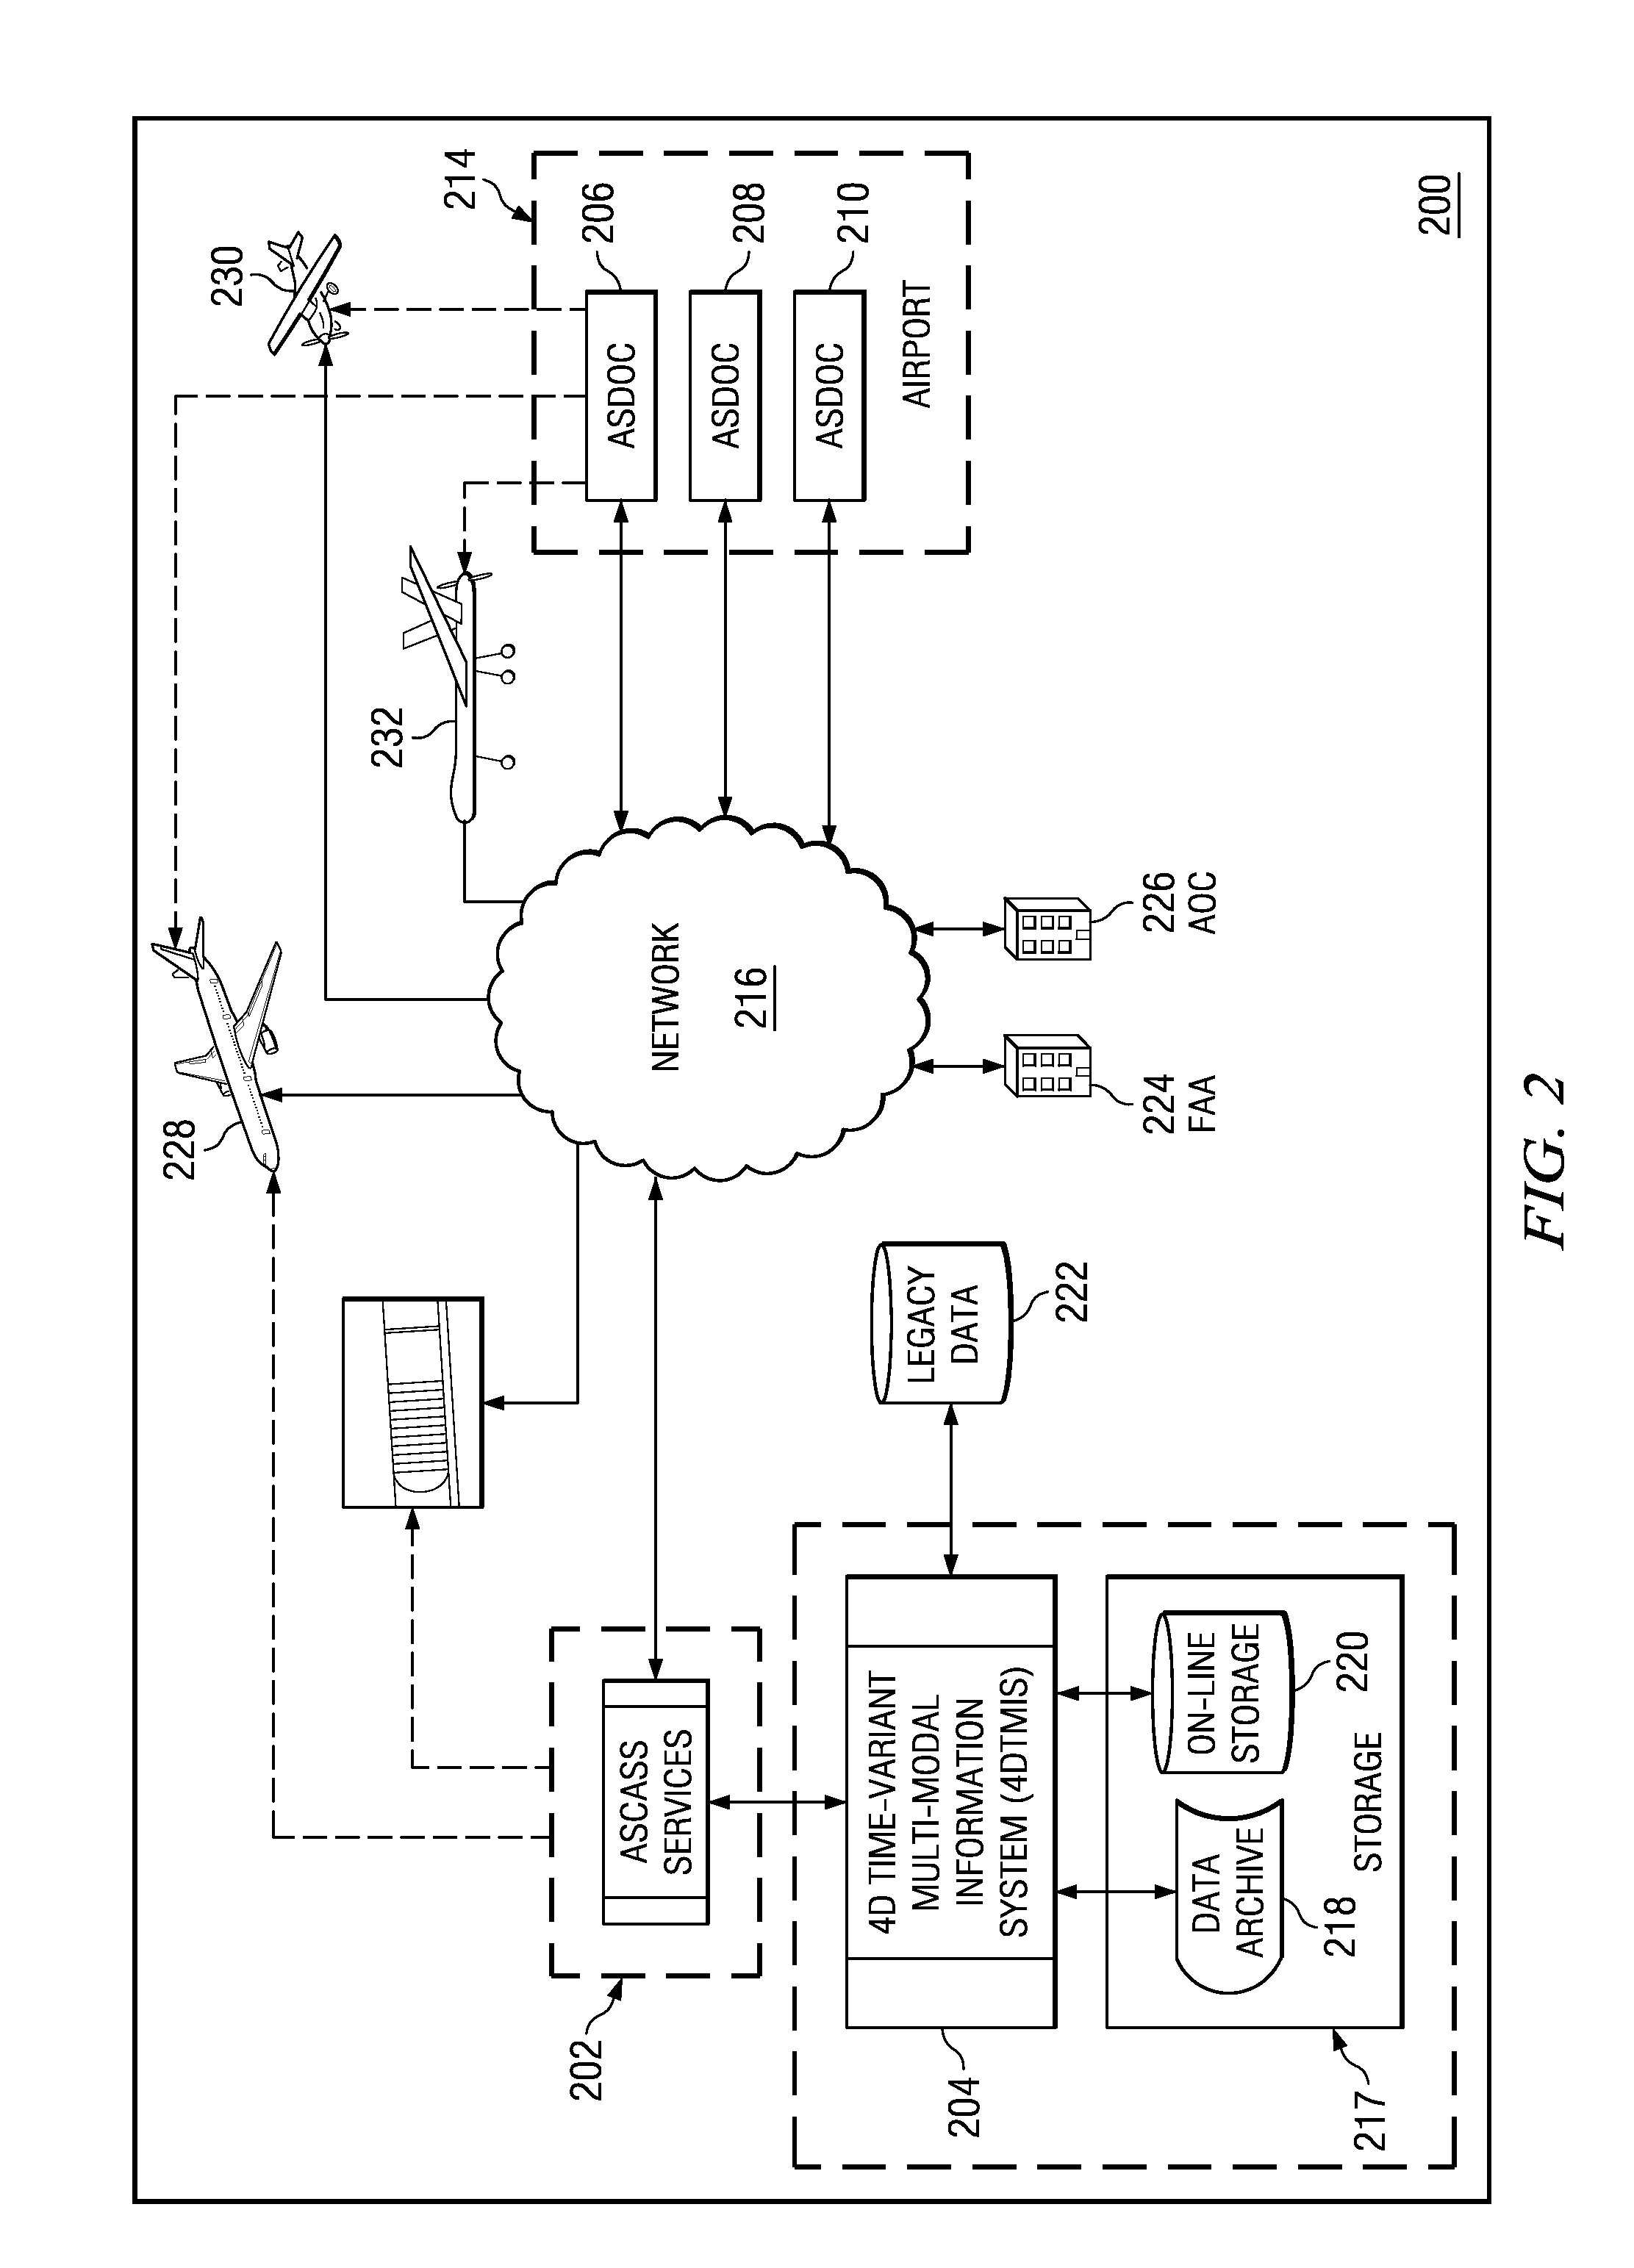 Spatial source collection and services system